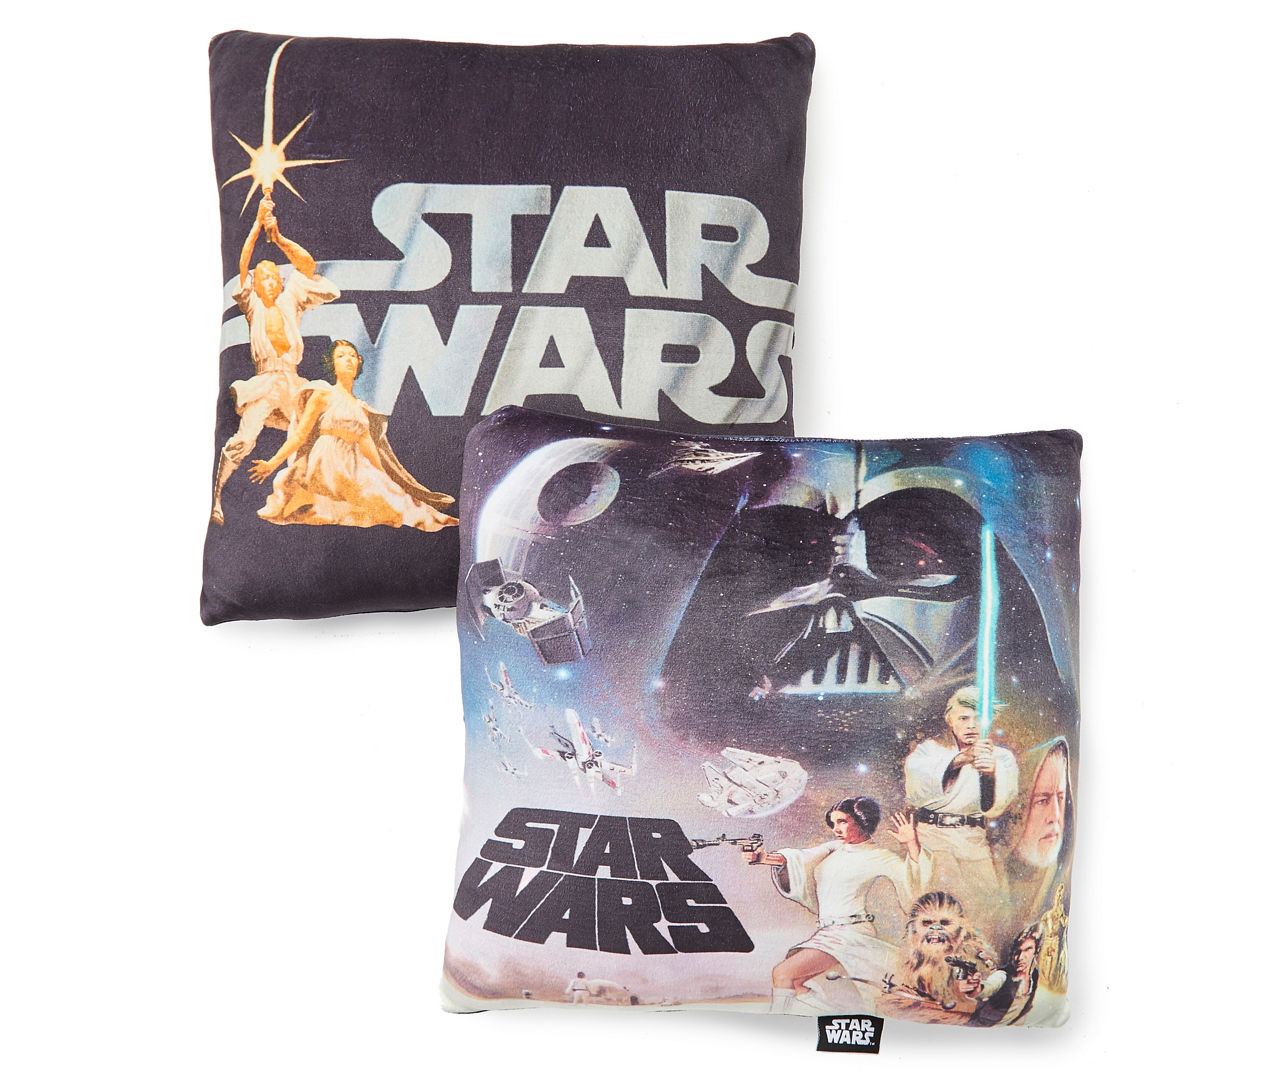 Tatooine Throw Pillow for Sale by donpringus